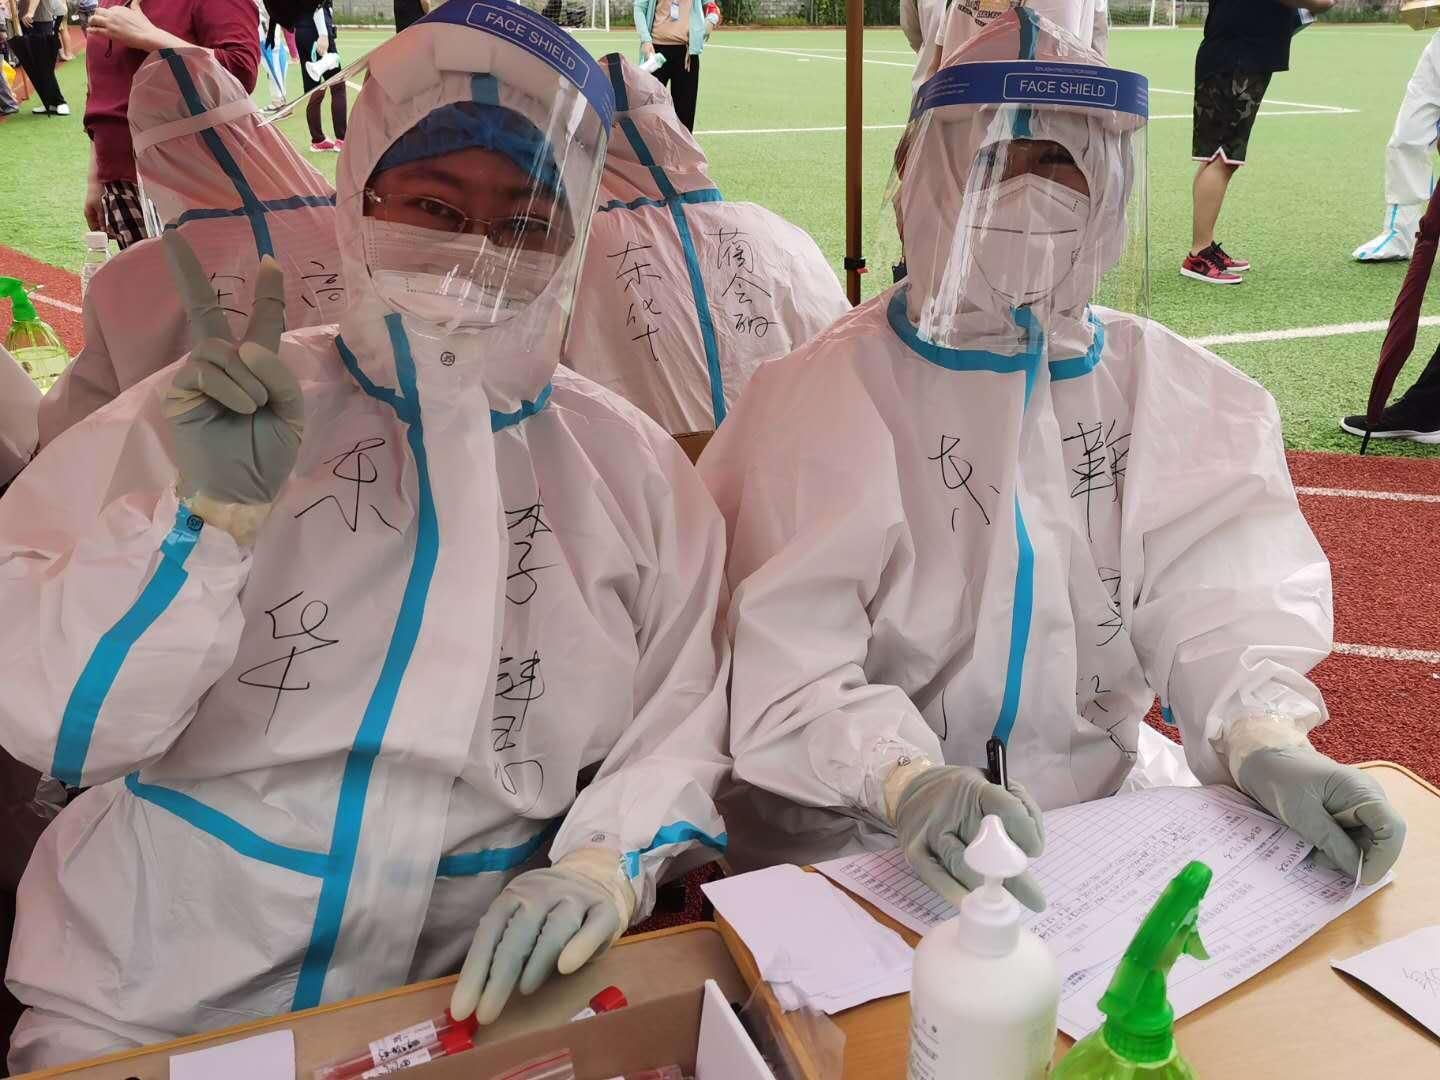 On August 4, 2020, Ju Wanzhen(right) and another woman were doing nucleic acid testing in Dalian, China's northeastern Liaoning Province.